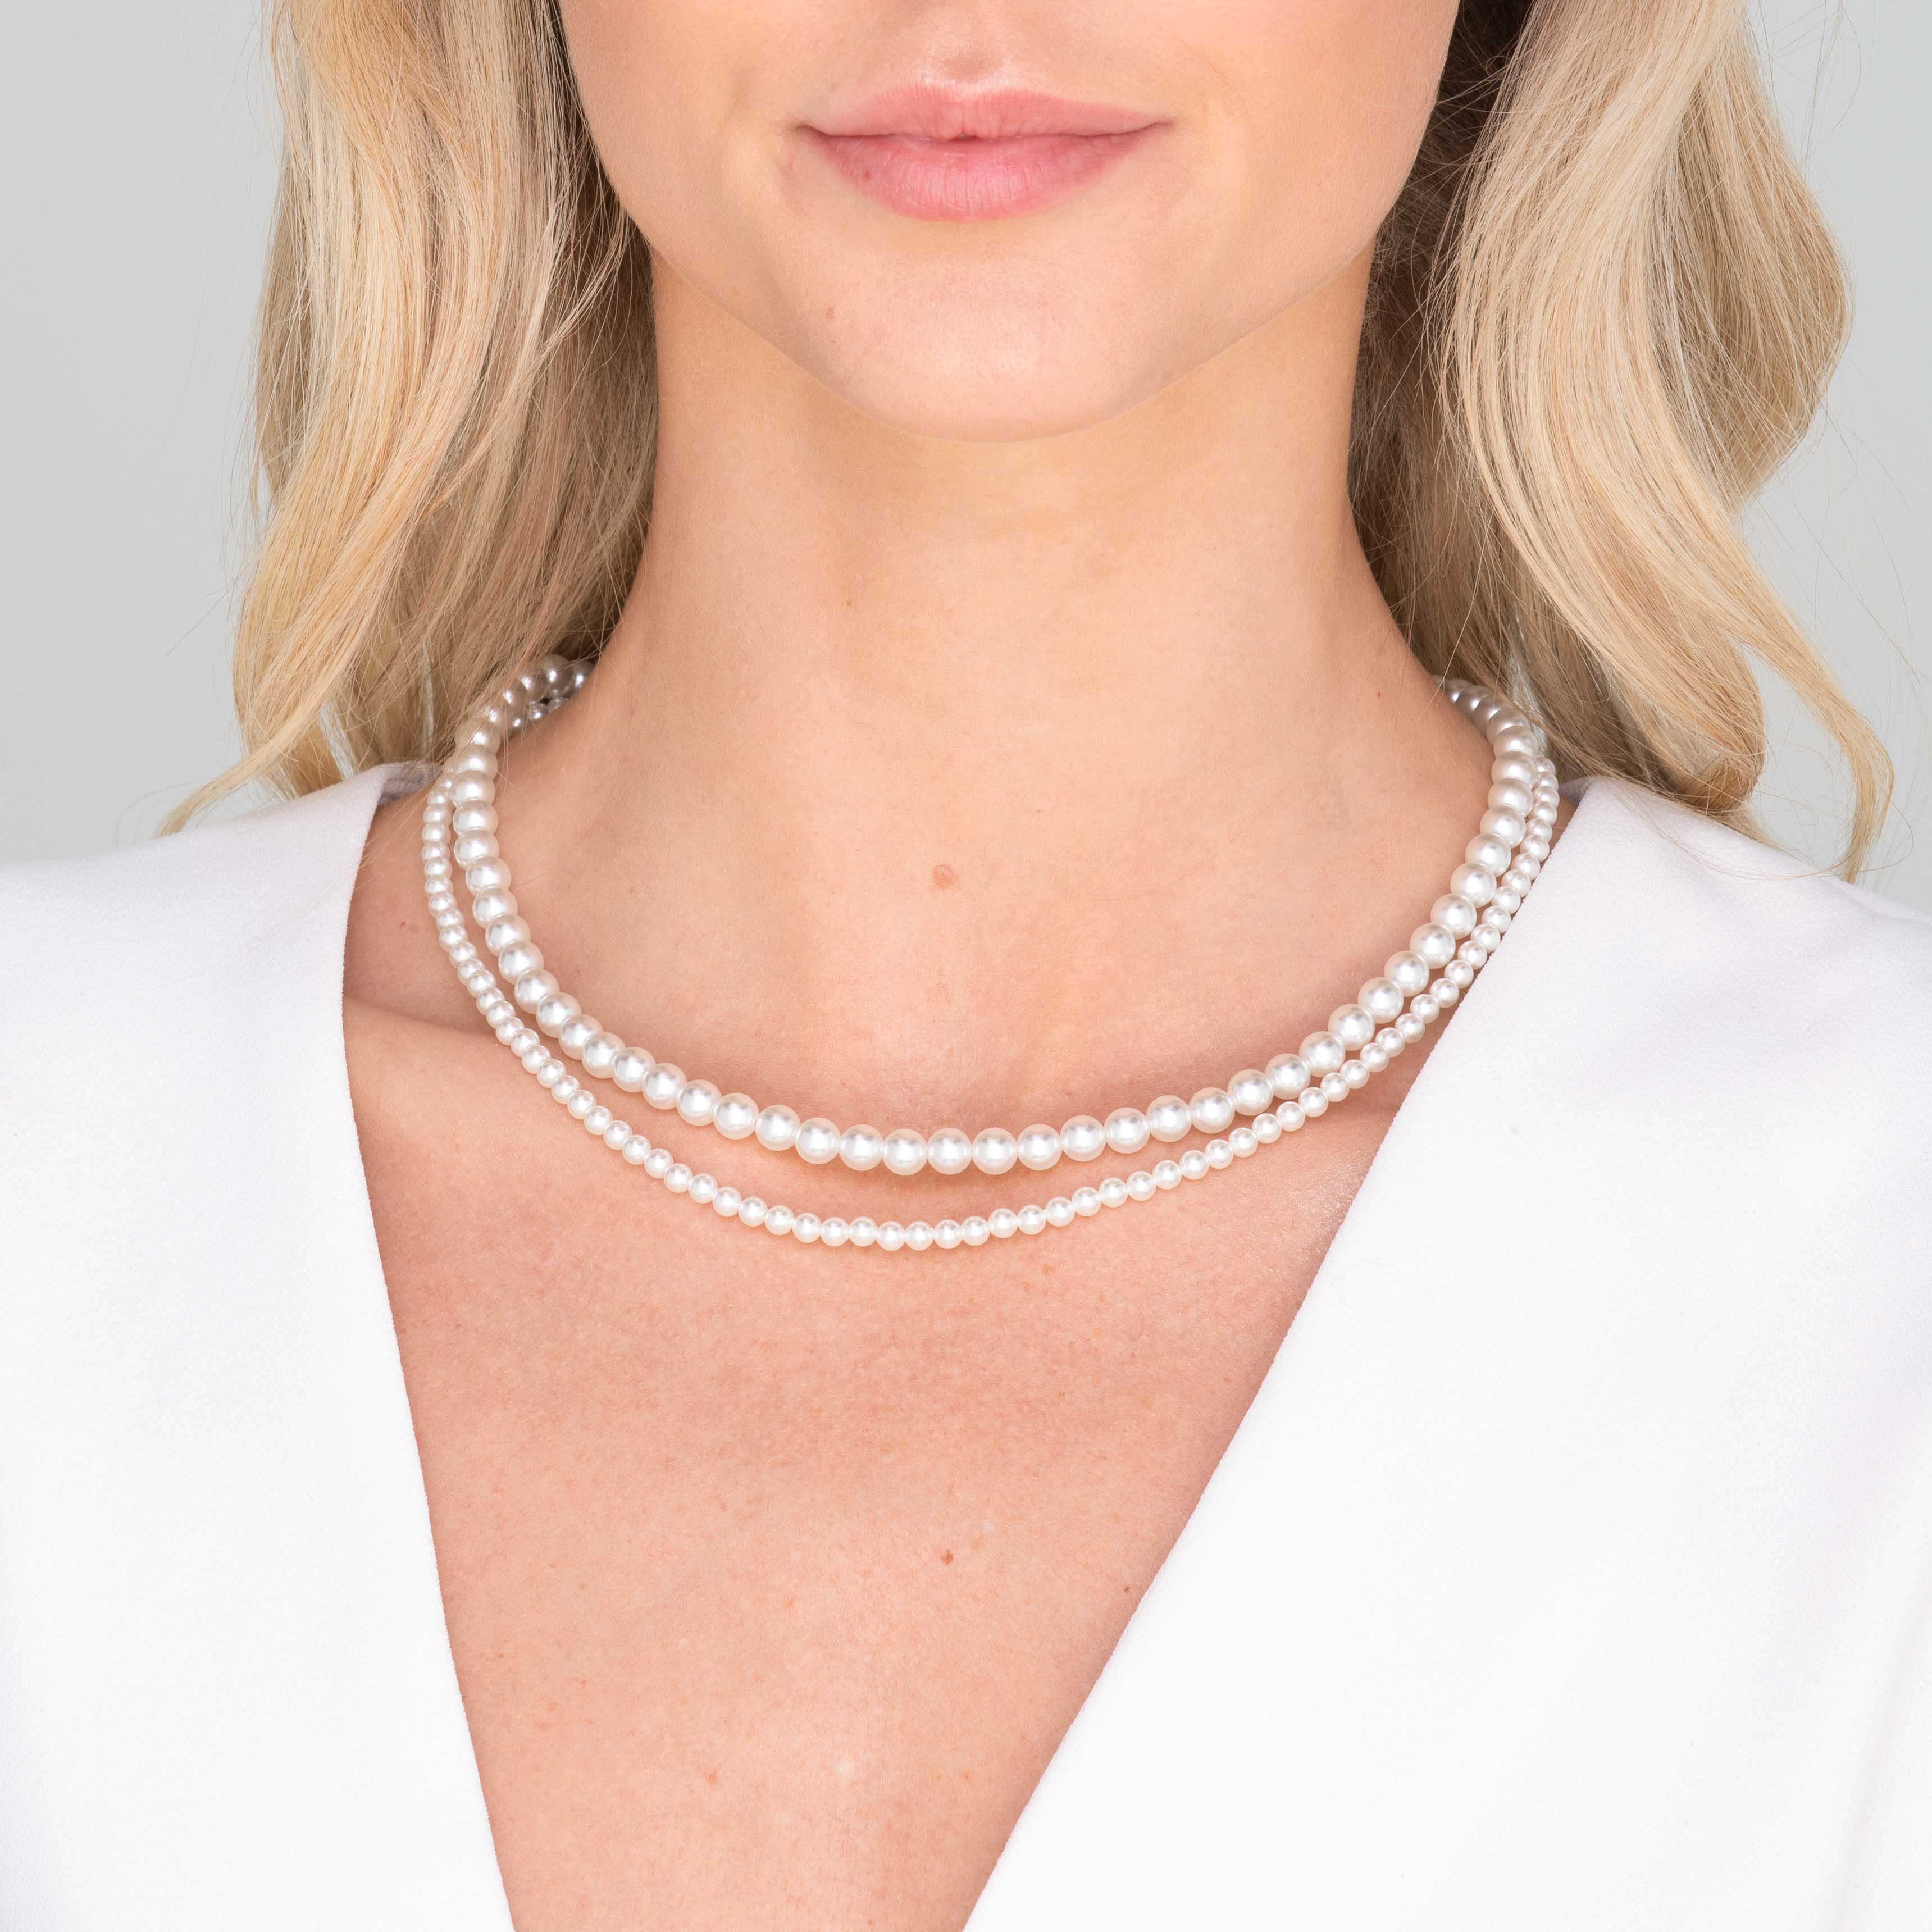 Classic 4mm Round Pearl Necklace